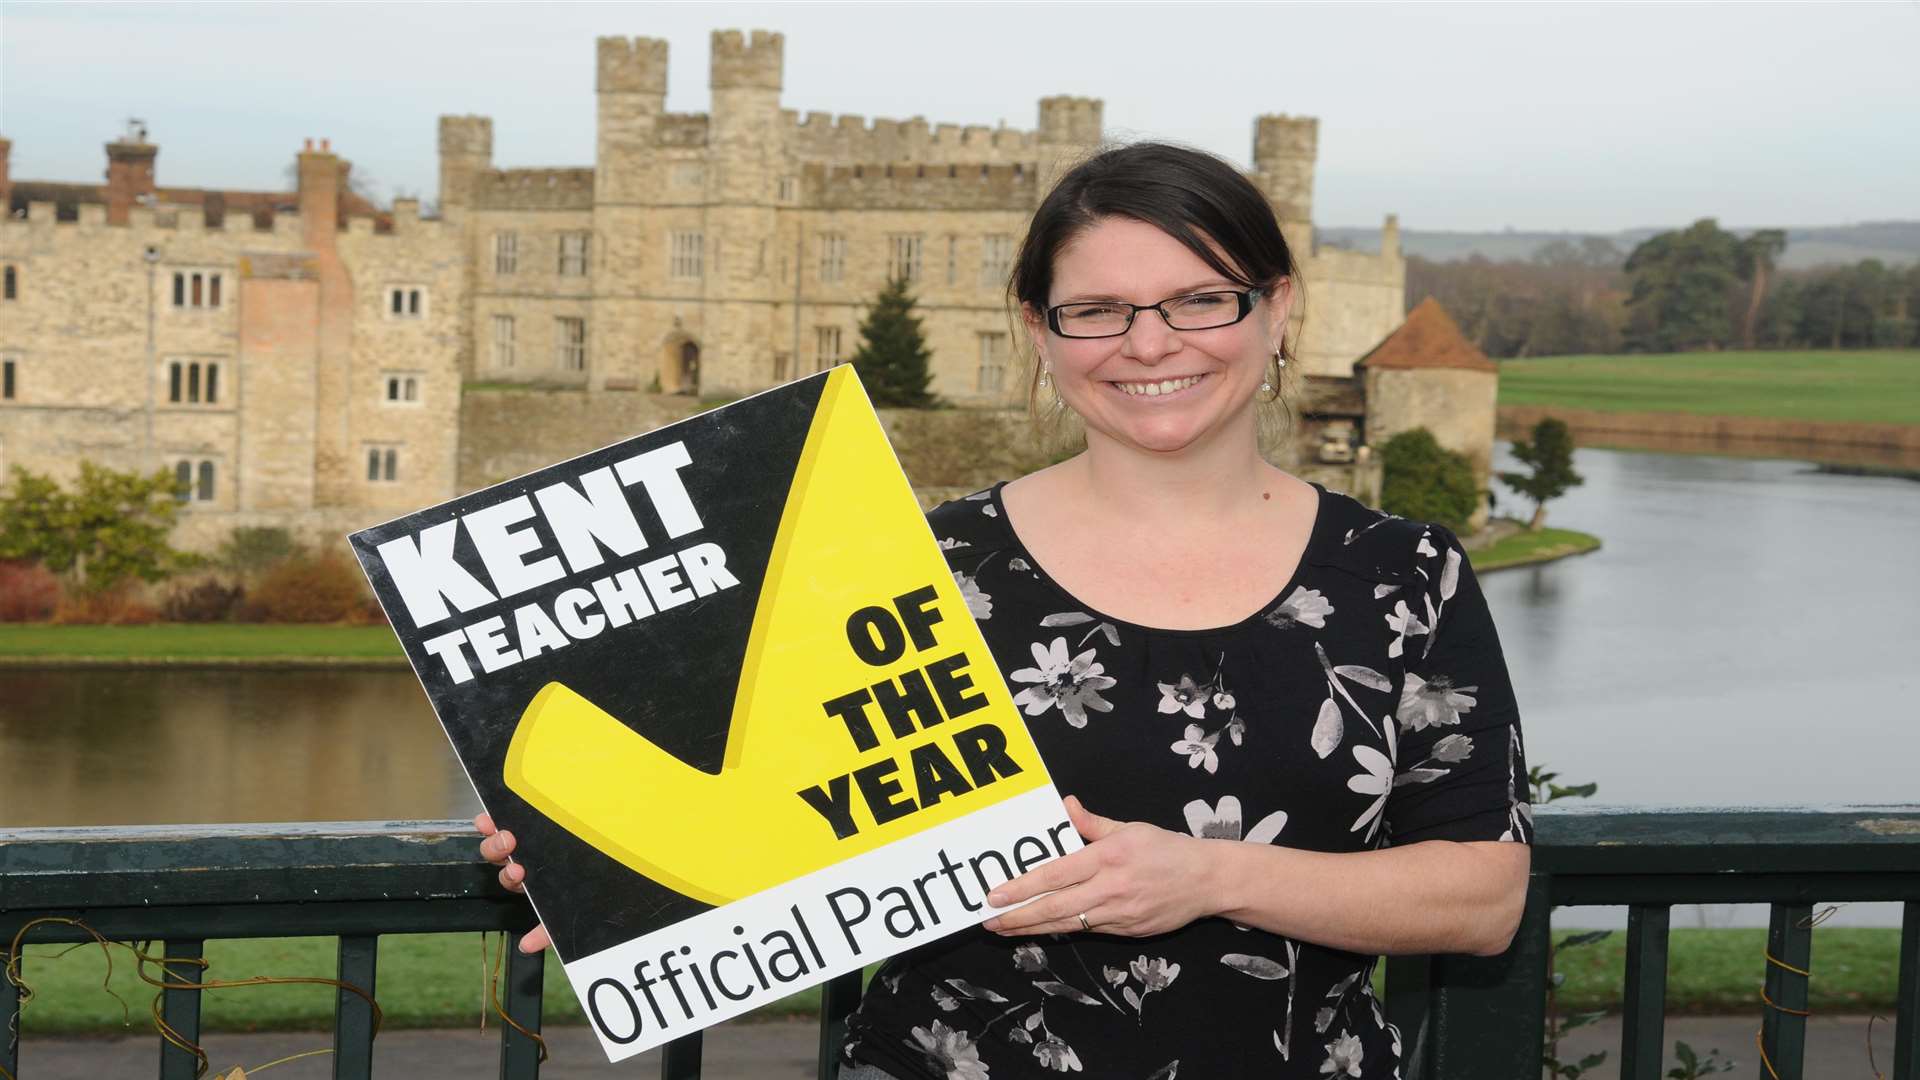 Rebecca Smith from Social Enterprise Kent announces support of the Kent Teacher of the Year Awards 2015 at Leeds Castle.